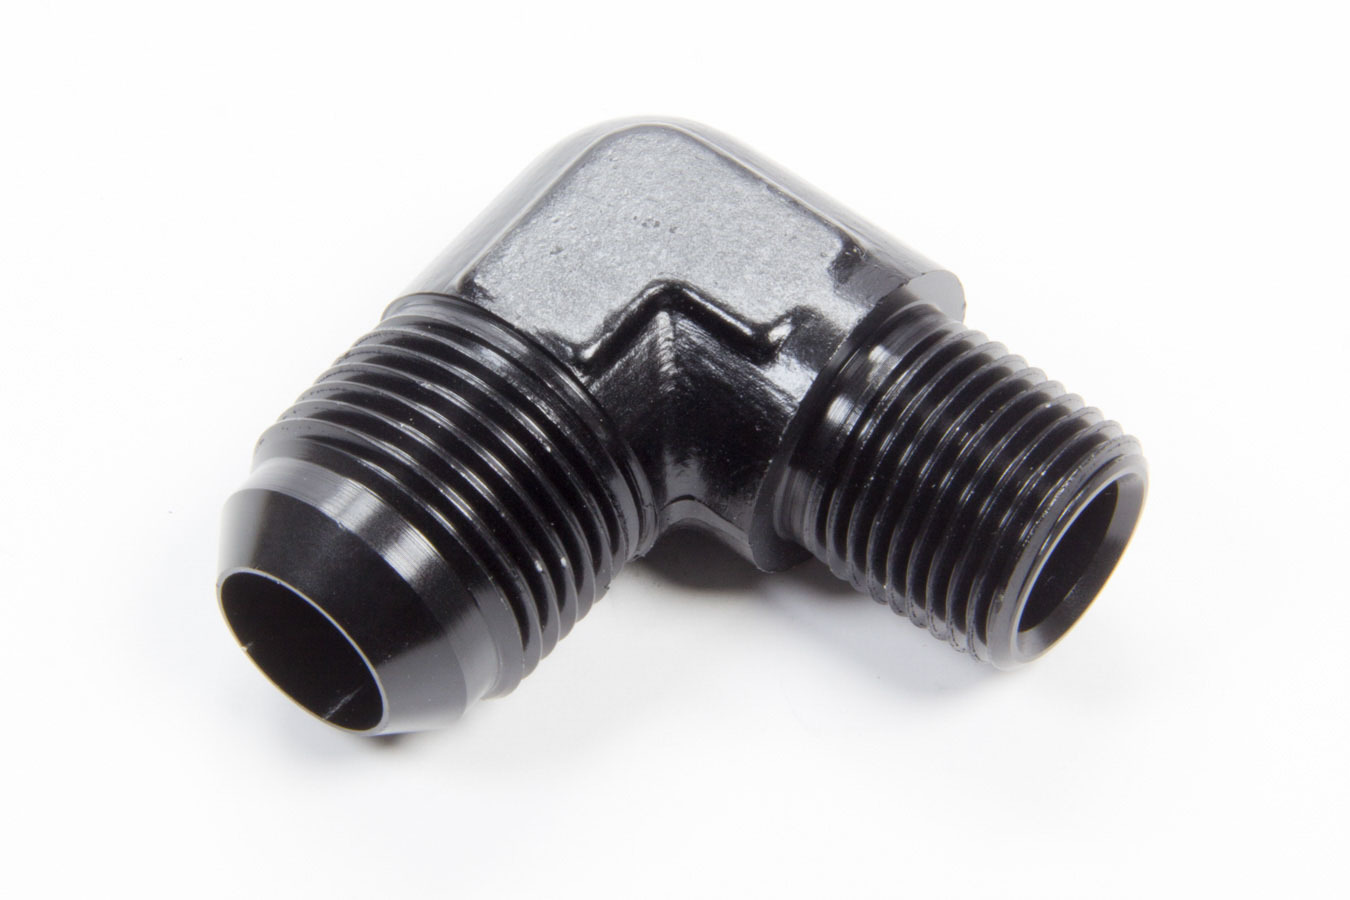 Aeroquip FCM5017 - Fitting, Adapter, 90 Degree, 12 AN Male to 1/2 in NPT Male, Aluminum, Black Anodized, Each